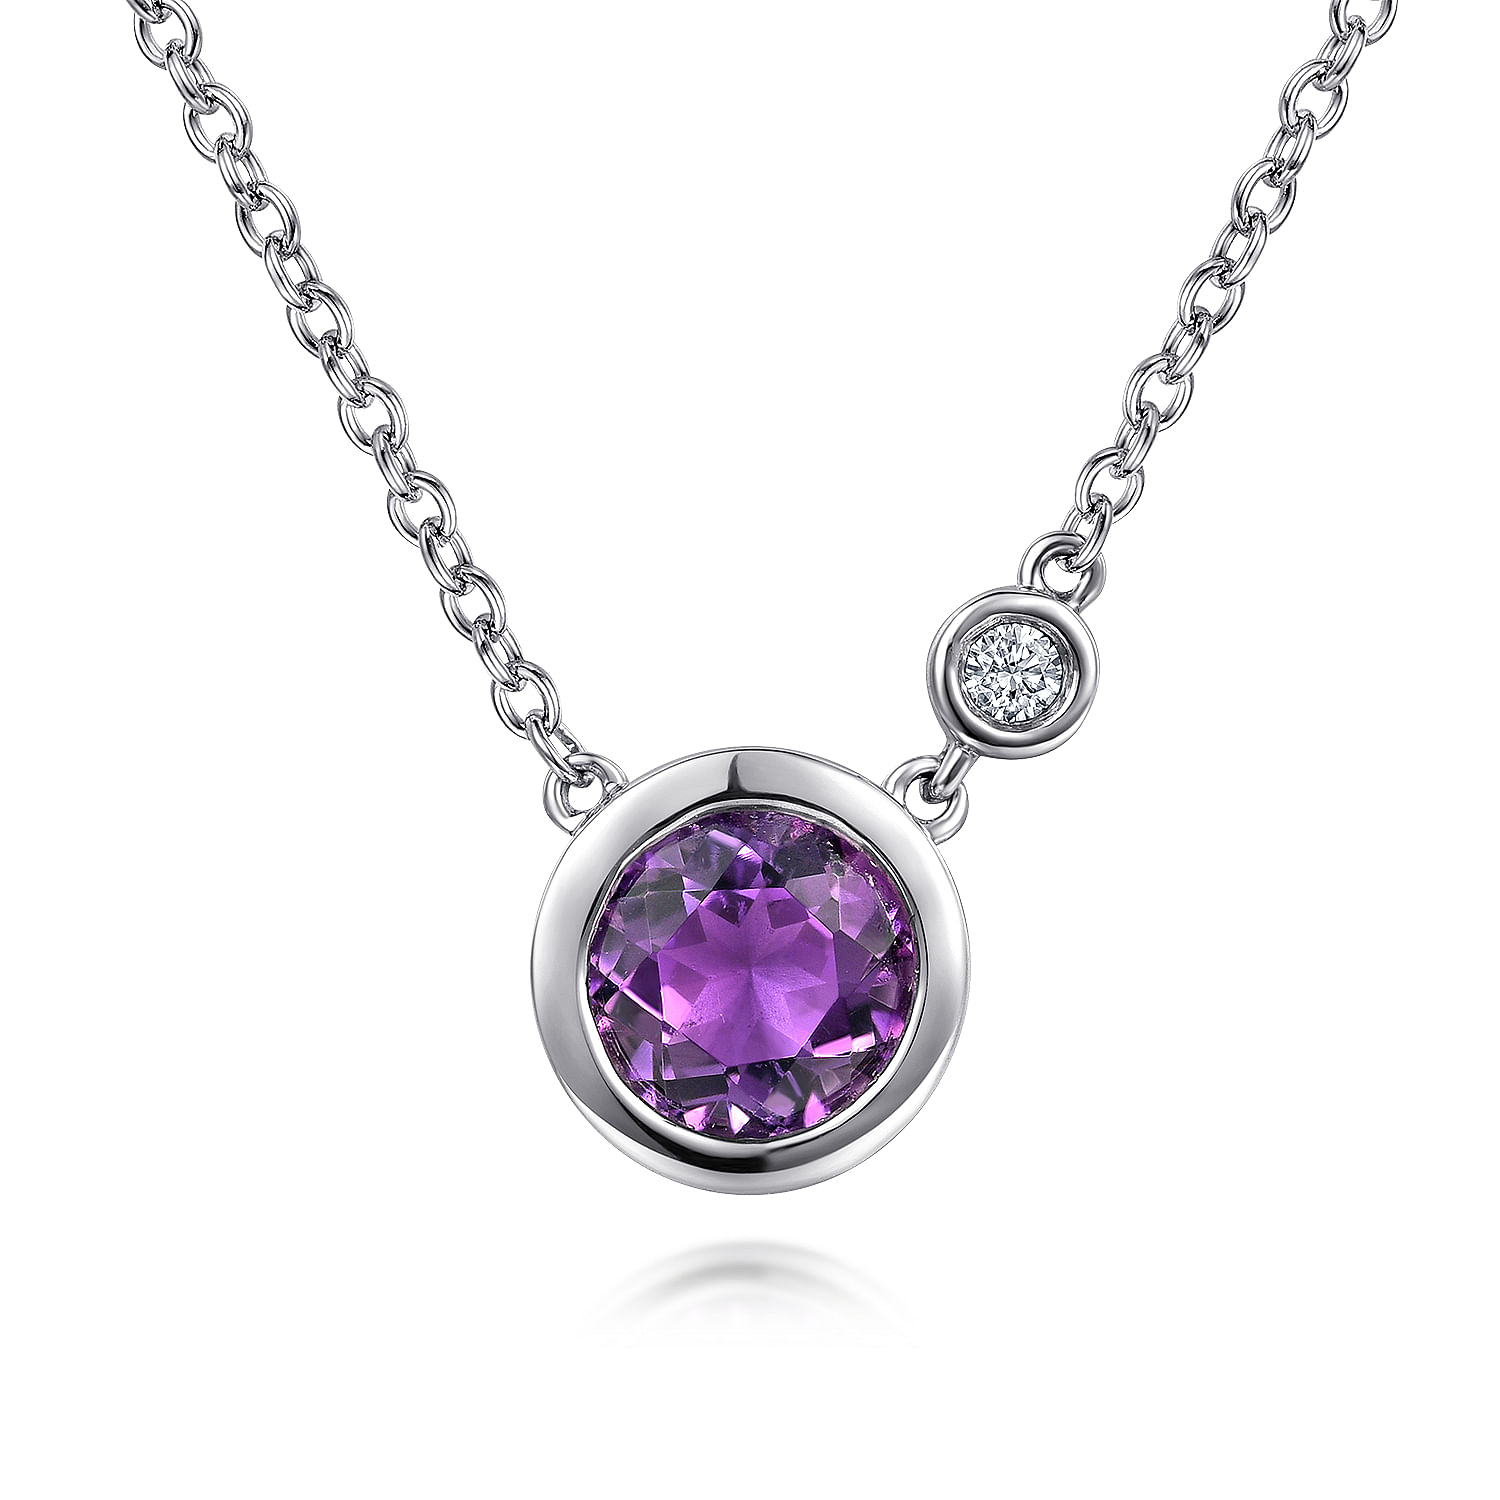 925 Sterling Silver Round Bezel Set Amethyst and Diamond Pendant Necklace